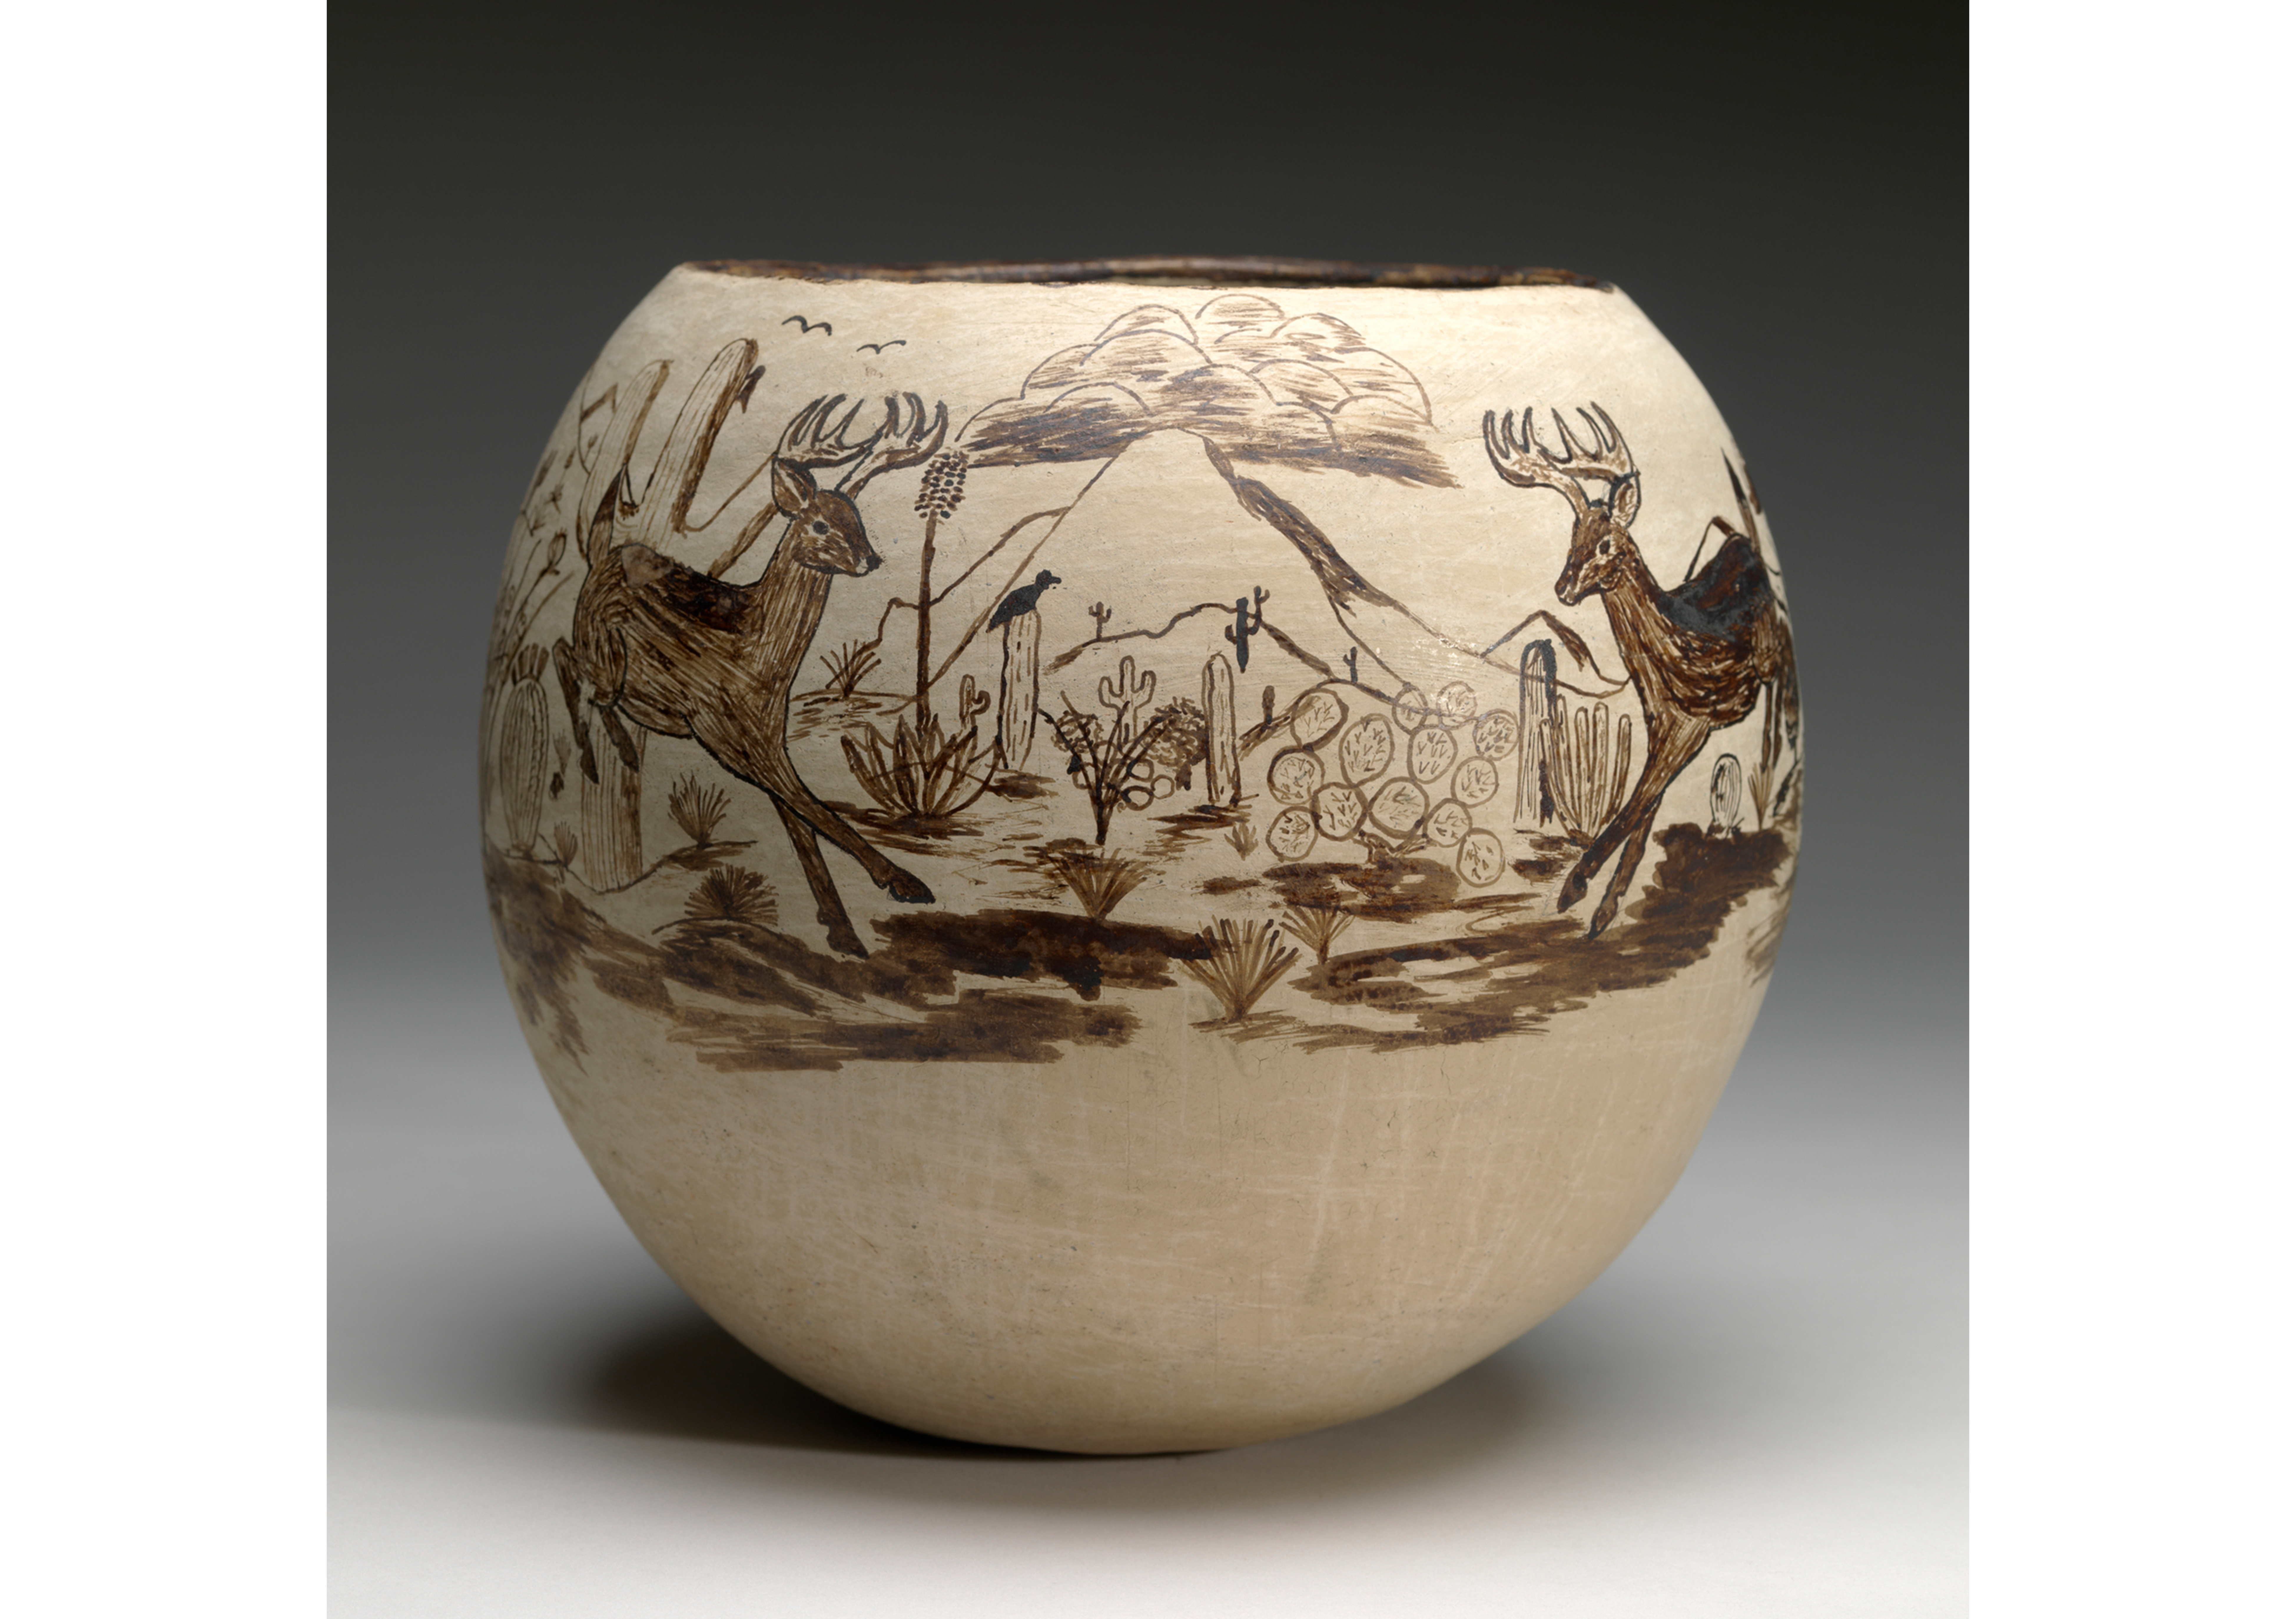 Large clay bowl with sepia drawings of animals and wilderness